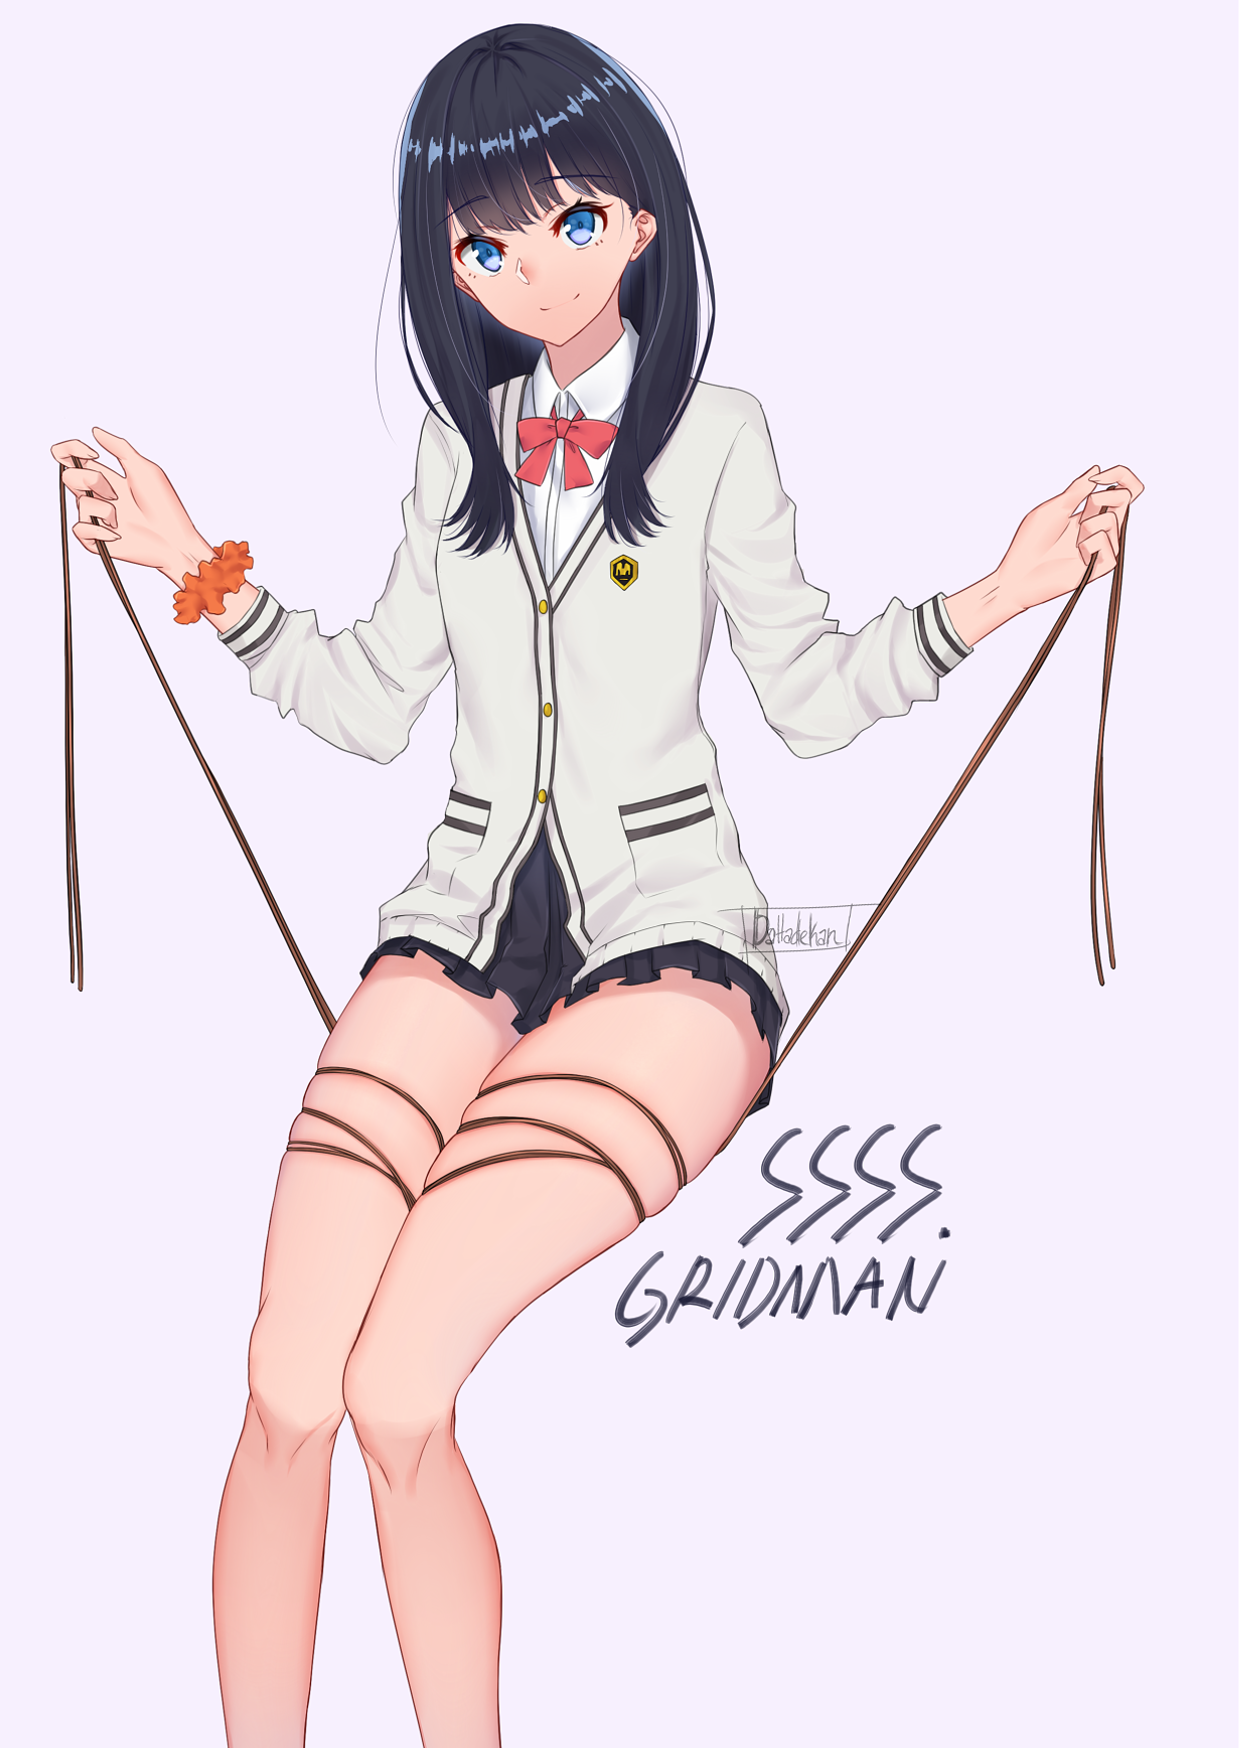 Featured image of post Rikka Thighs Rikka takarada is the main heroine in one of the new anime s this season called ssss gridman and she is getting alot of attention and you could see why she is one hot female character